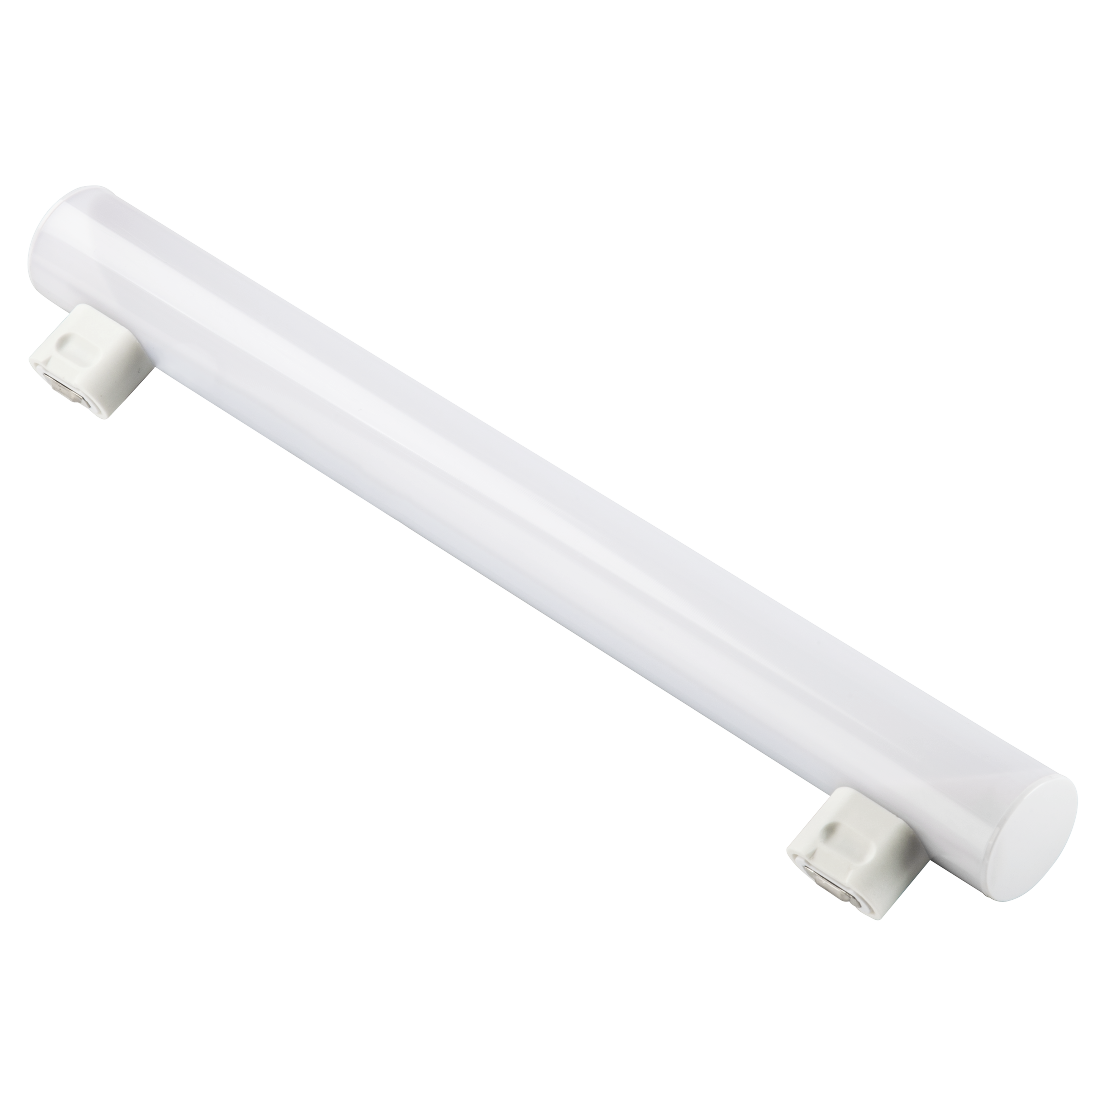 abx2 High-Res Image 2 - Xavax, LED Lamp, S14s, 320 lm Replaces 30 W, Linear Lamp, 30 cm, warm white